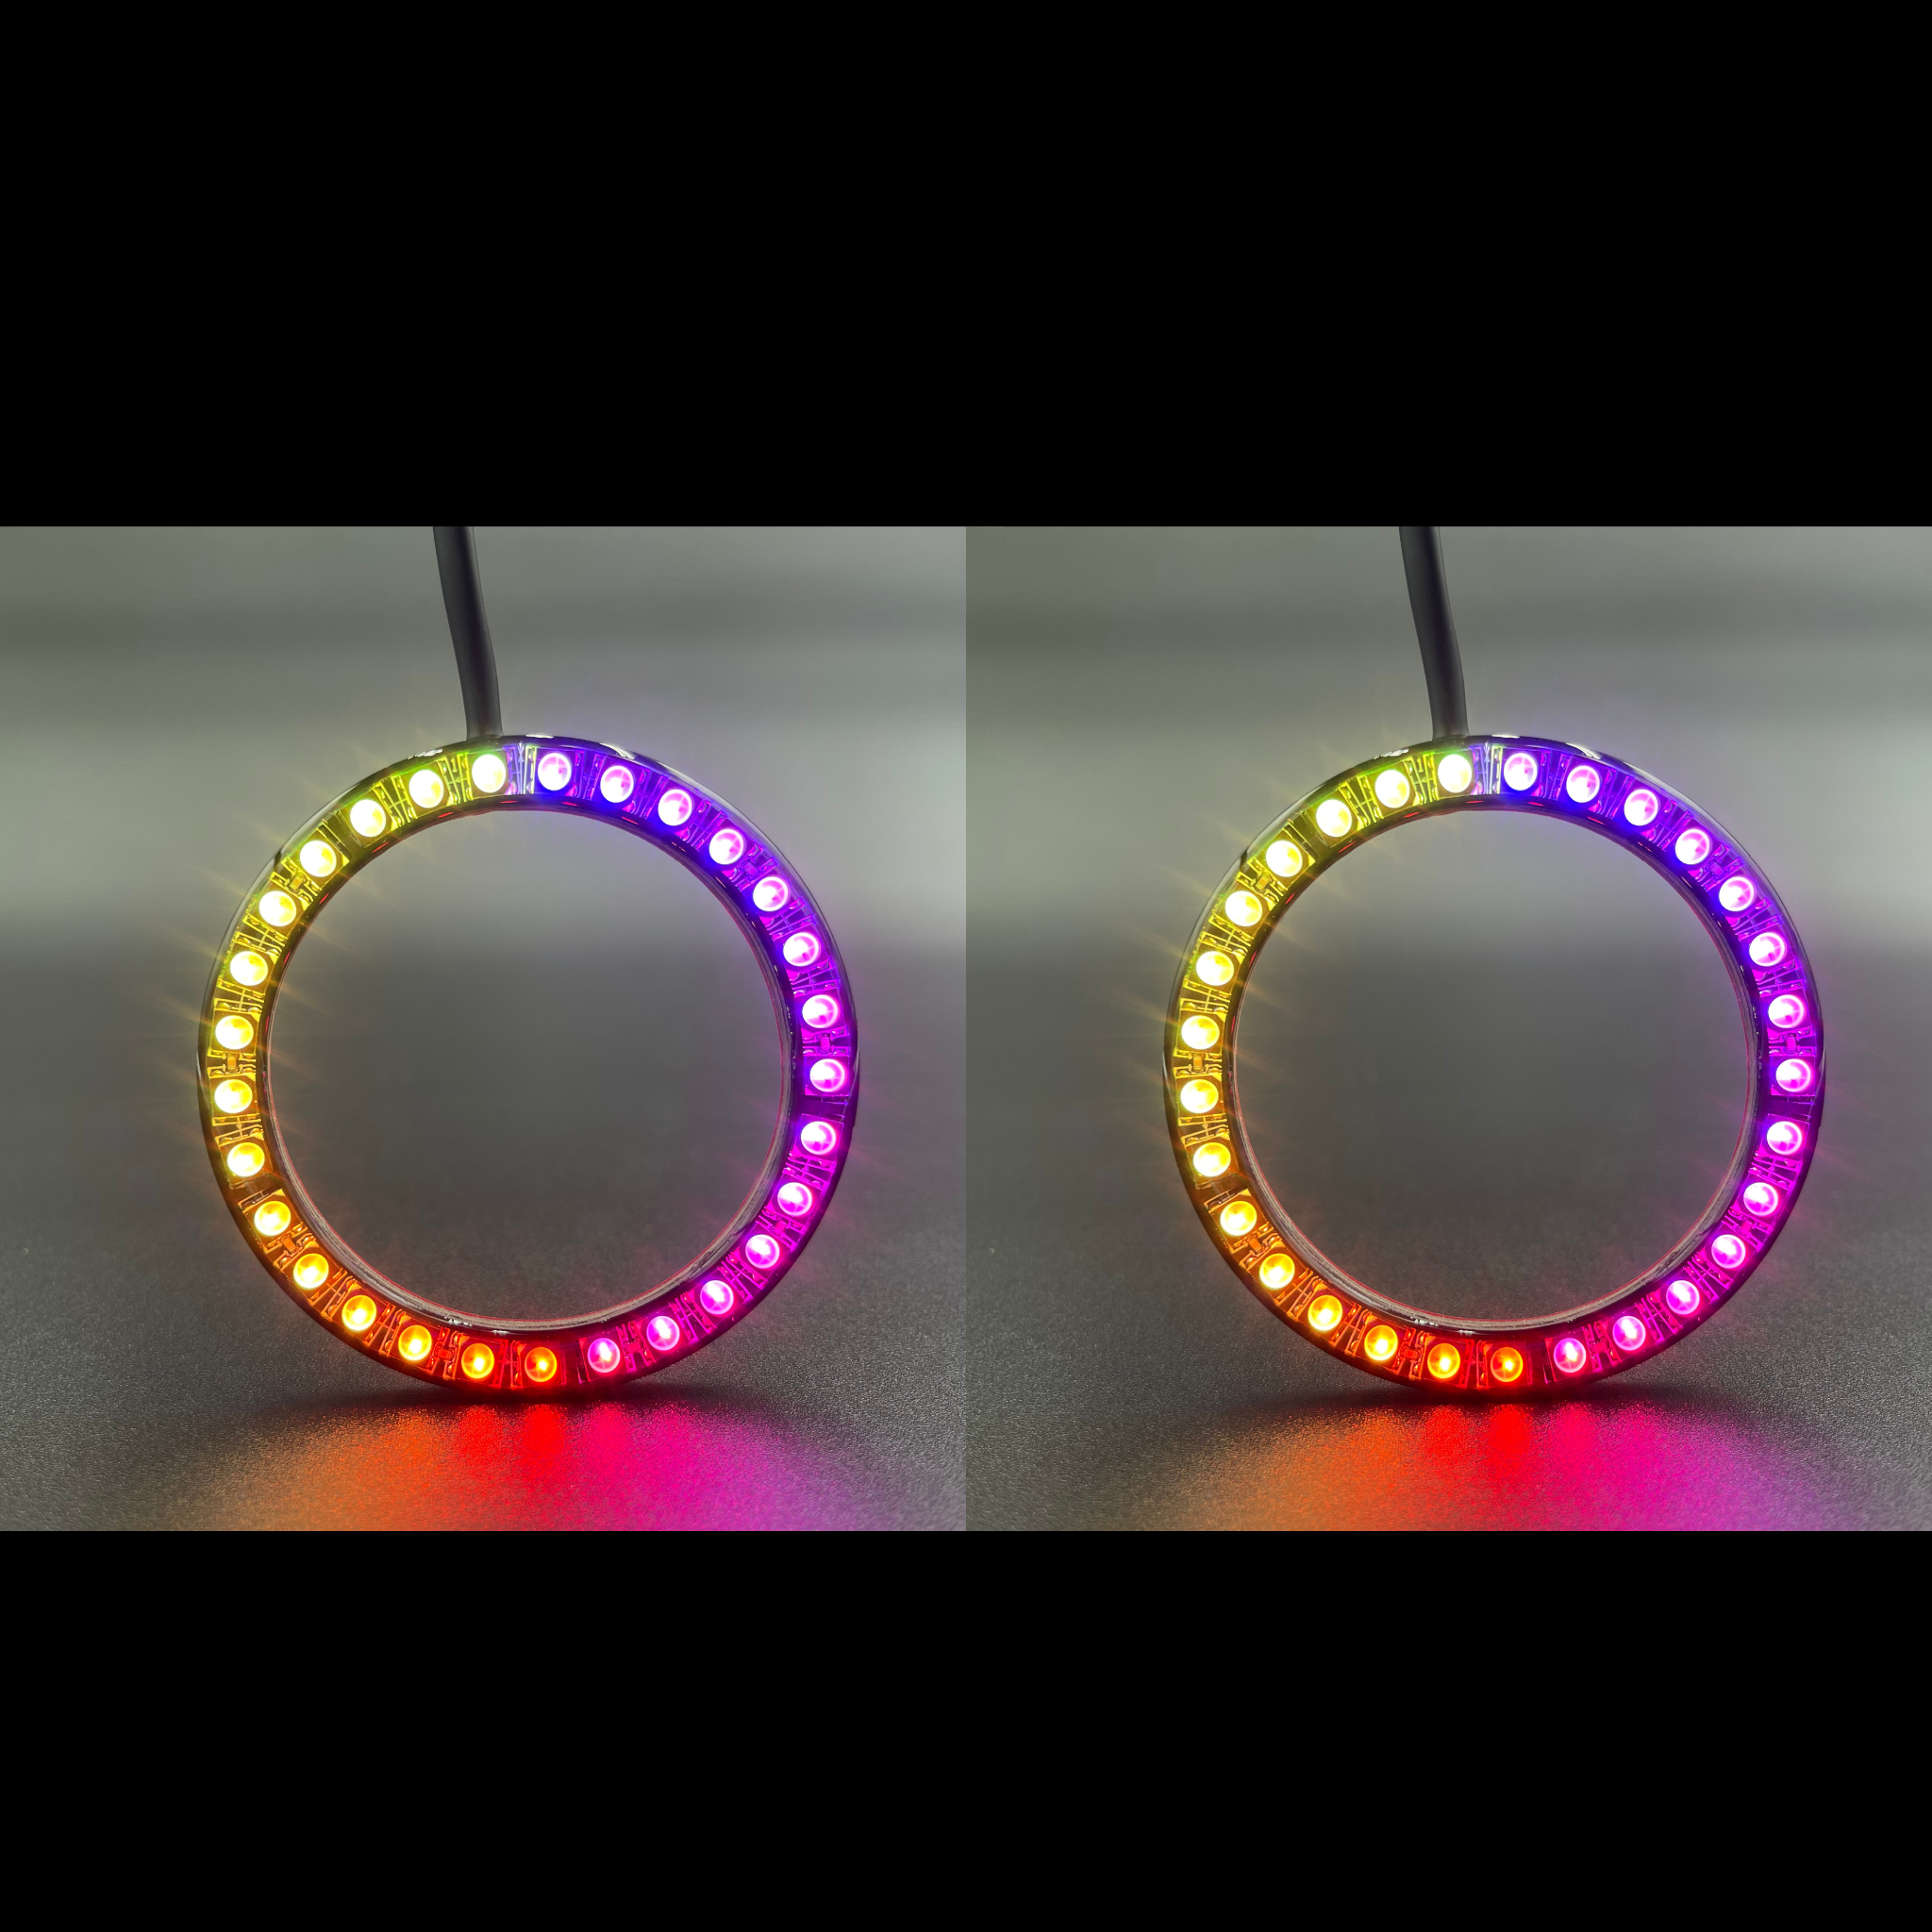 2011-2013 Ford Fiesta Multicolor Halo Kit - RGB Halo Kits Multicolor Flow Series Color Chasing RGBWA LED headlight kit Oracle Lighting Trendz OneUpLighting Morimoto theretrofitsource AutoLEDTech Diode Dynamics